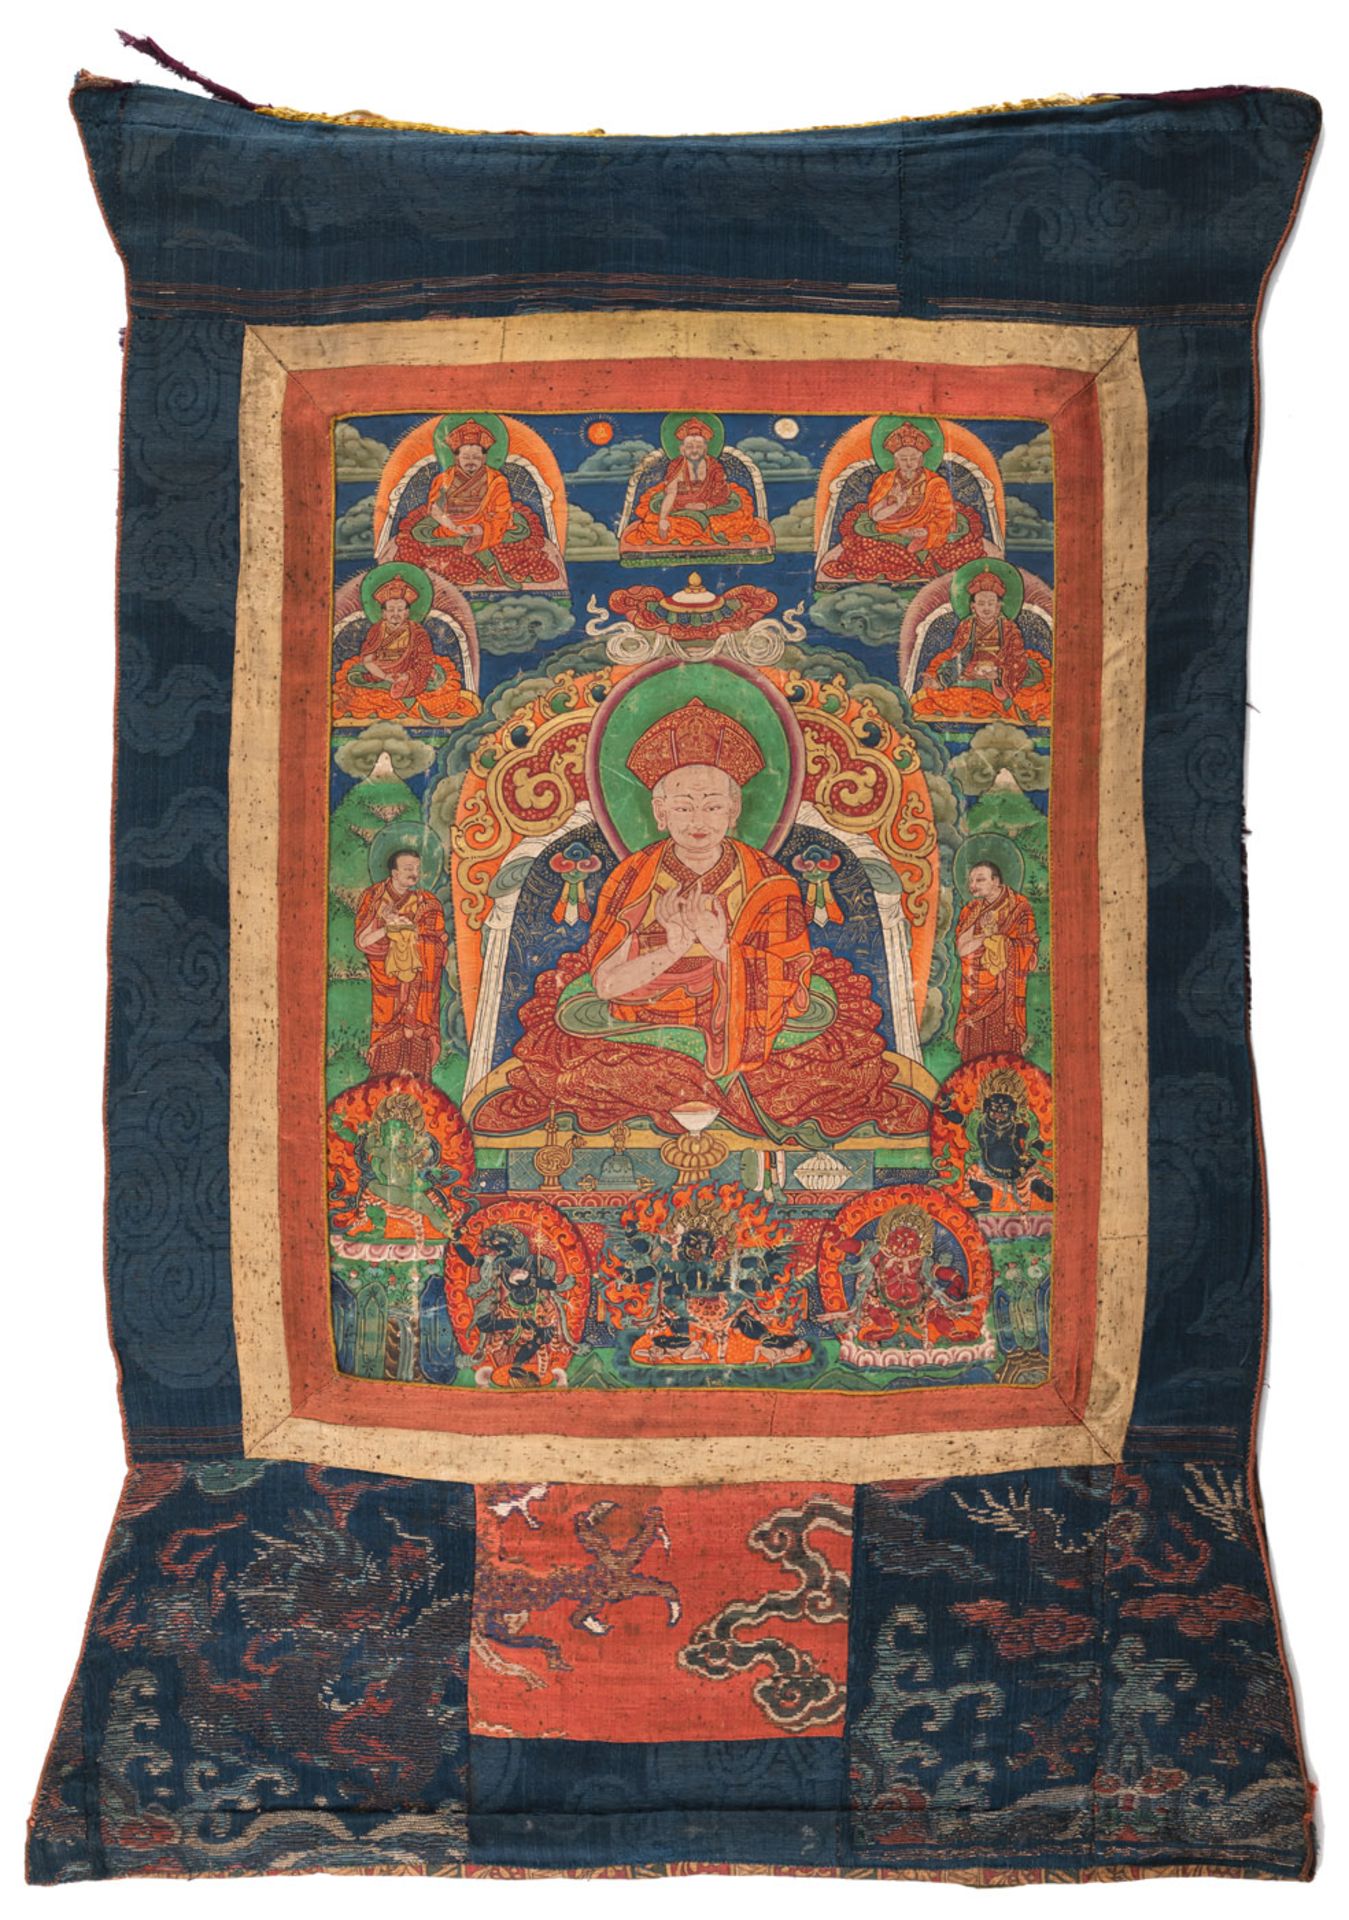 A LINEAGE THANGKA FROM THE DRUKPA-KAGYU TRADITION IN BHUTAN - Image 2 of 4